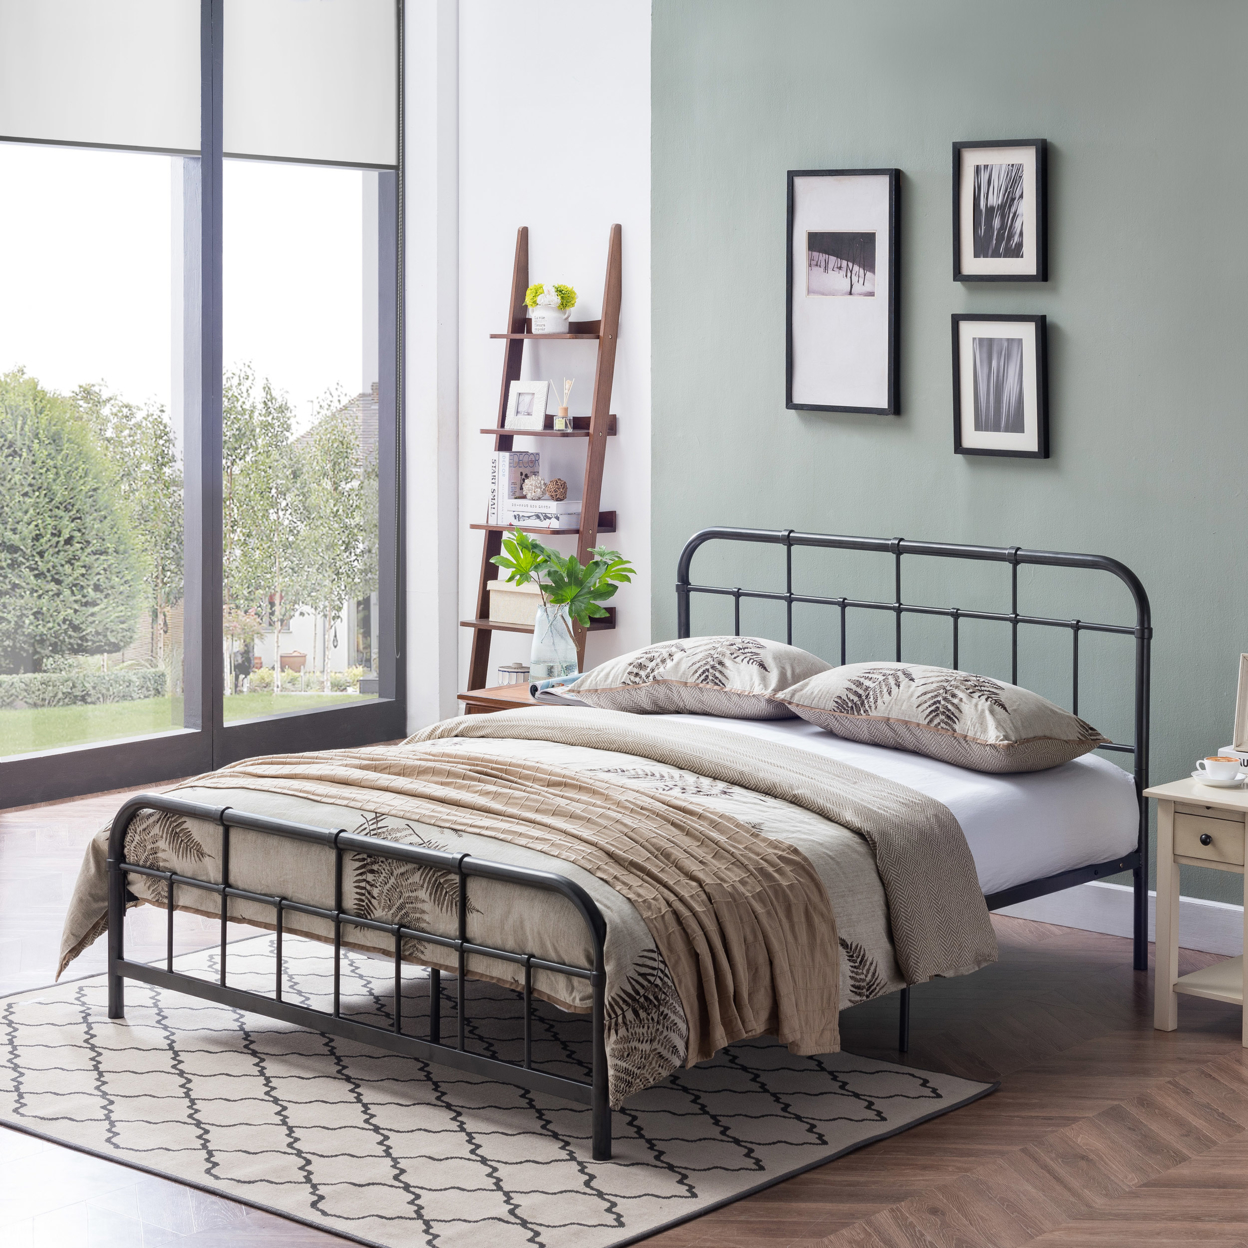 Sylvia Queen-Size Iron Bed Frame, Minimal, Industrial - Charcoal Gray